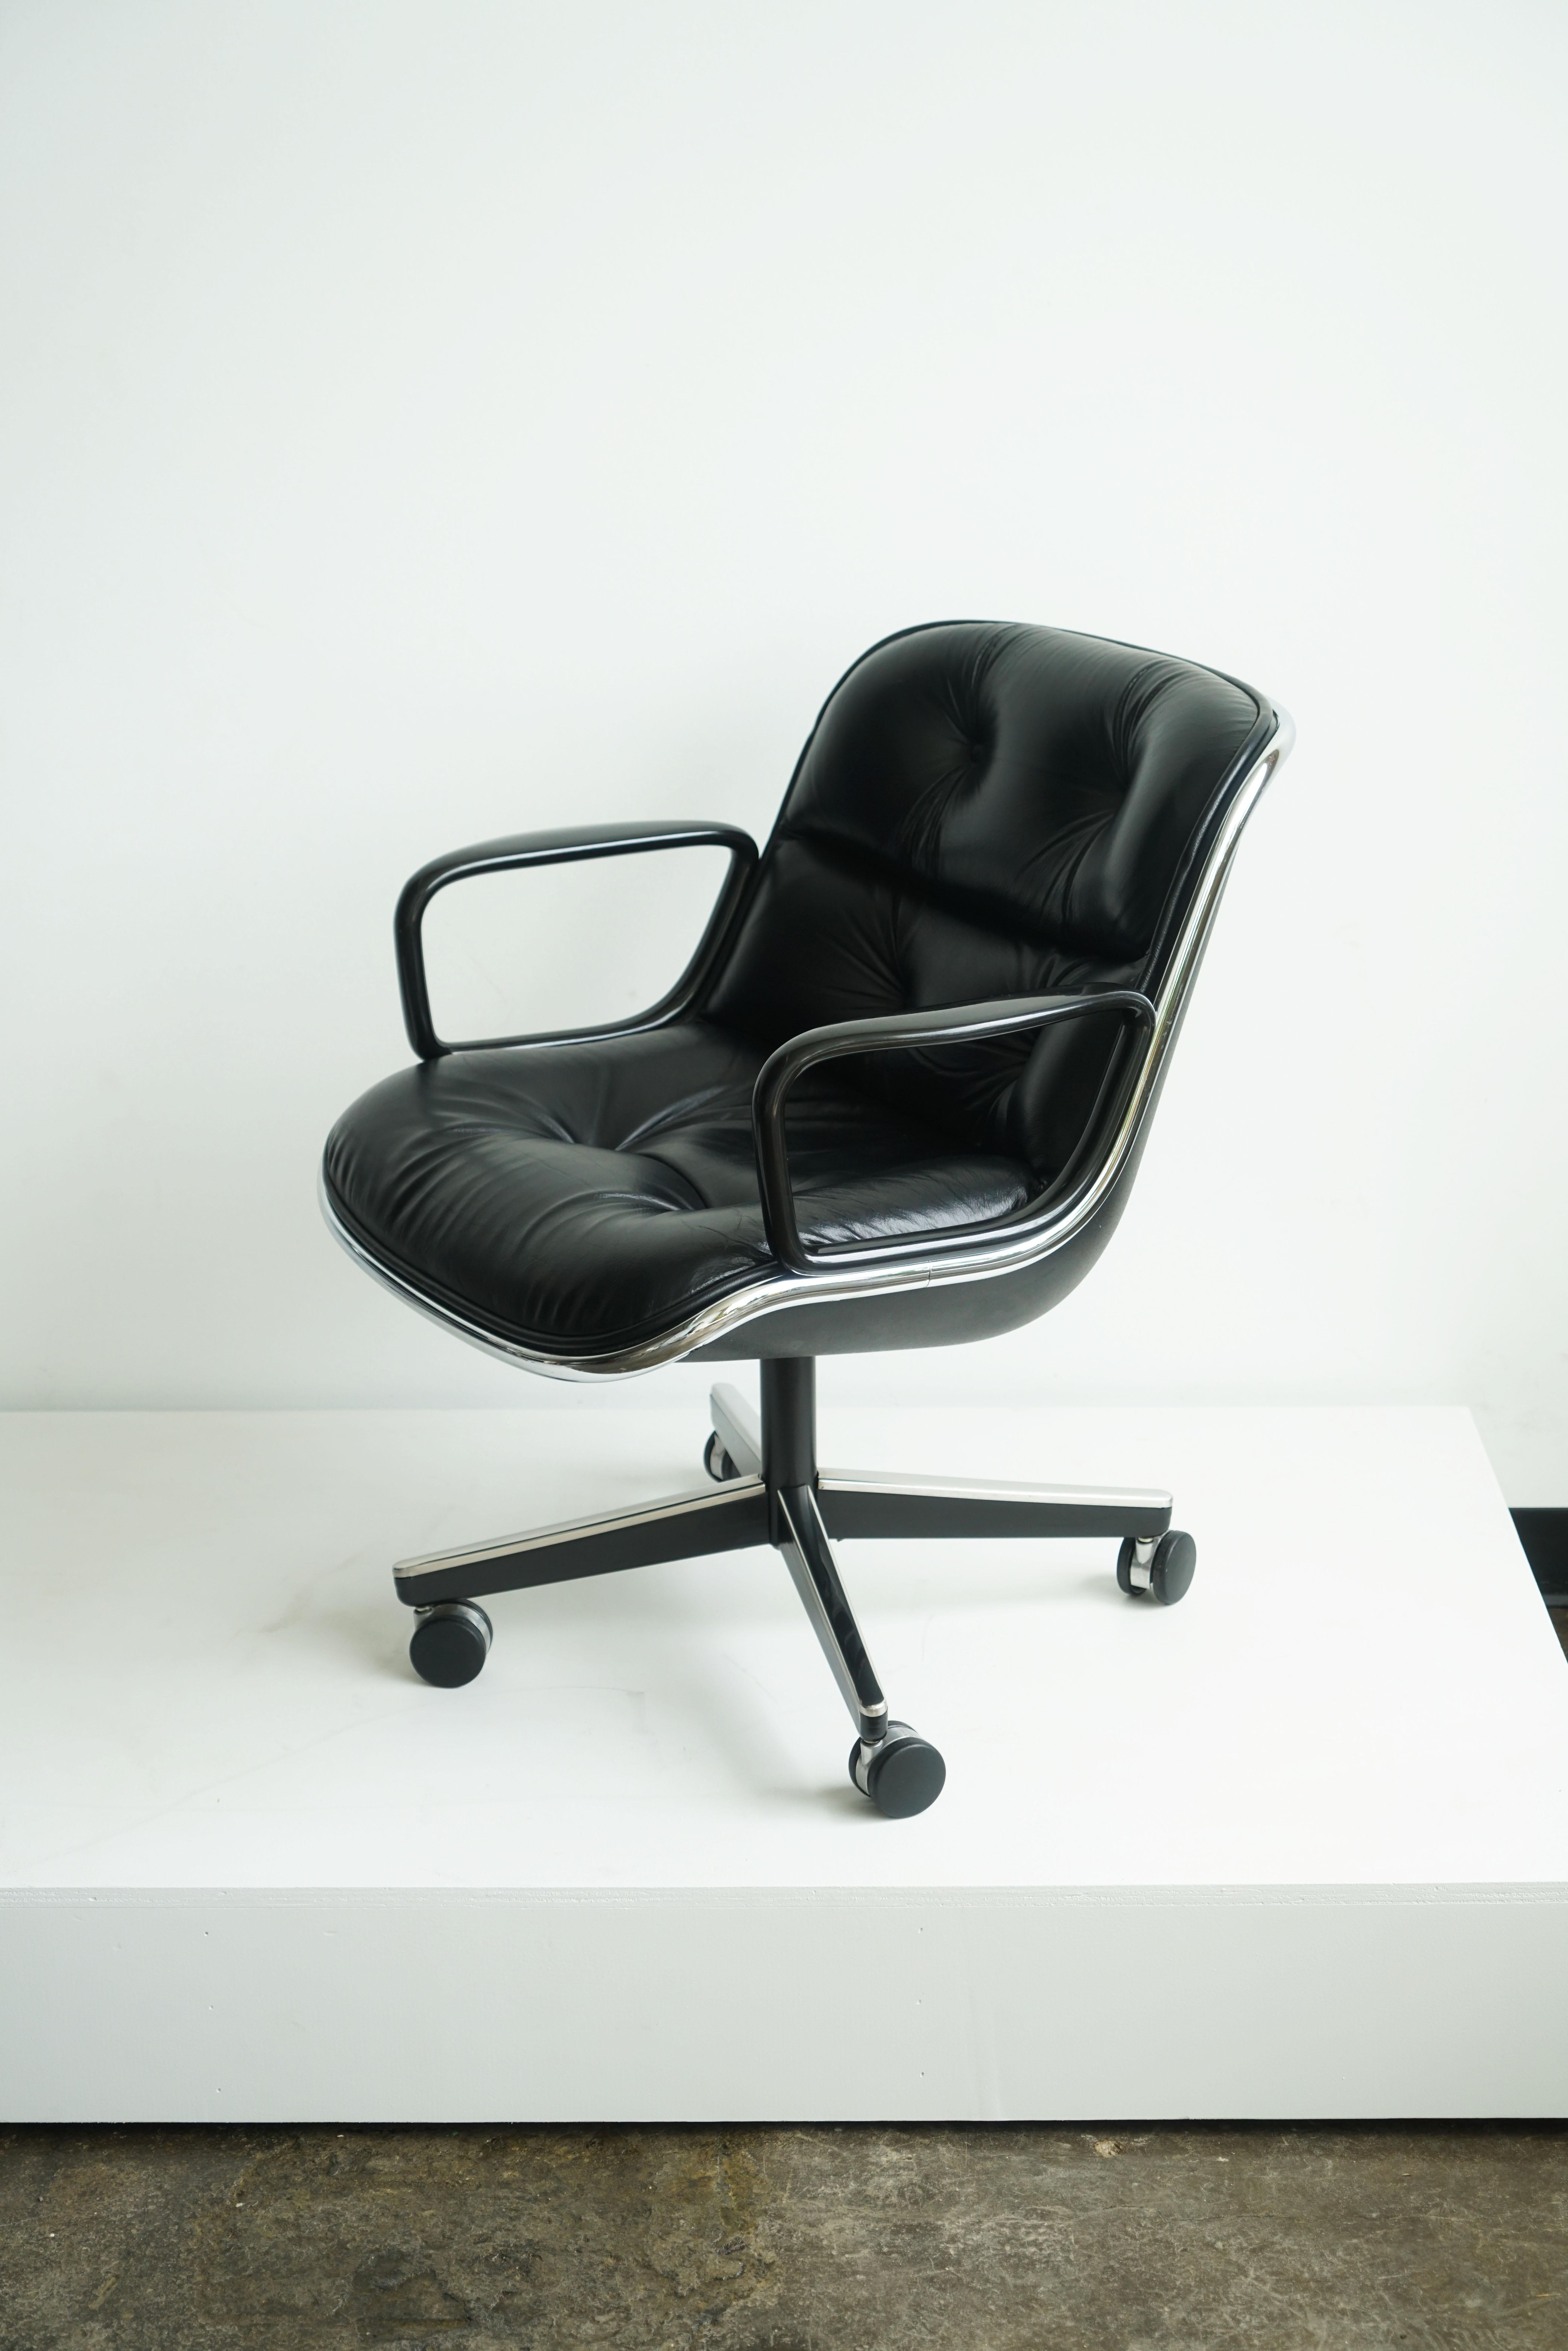 Knoll Charles Pollock Executive Desk Chairs in Black Leather For Sale 2